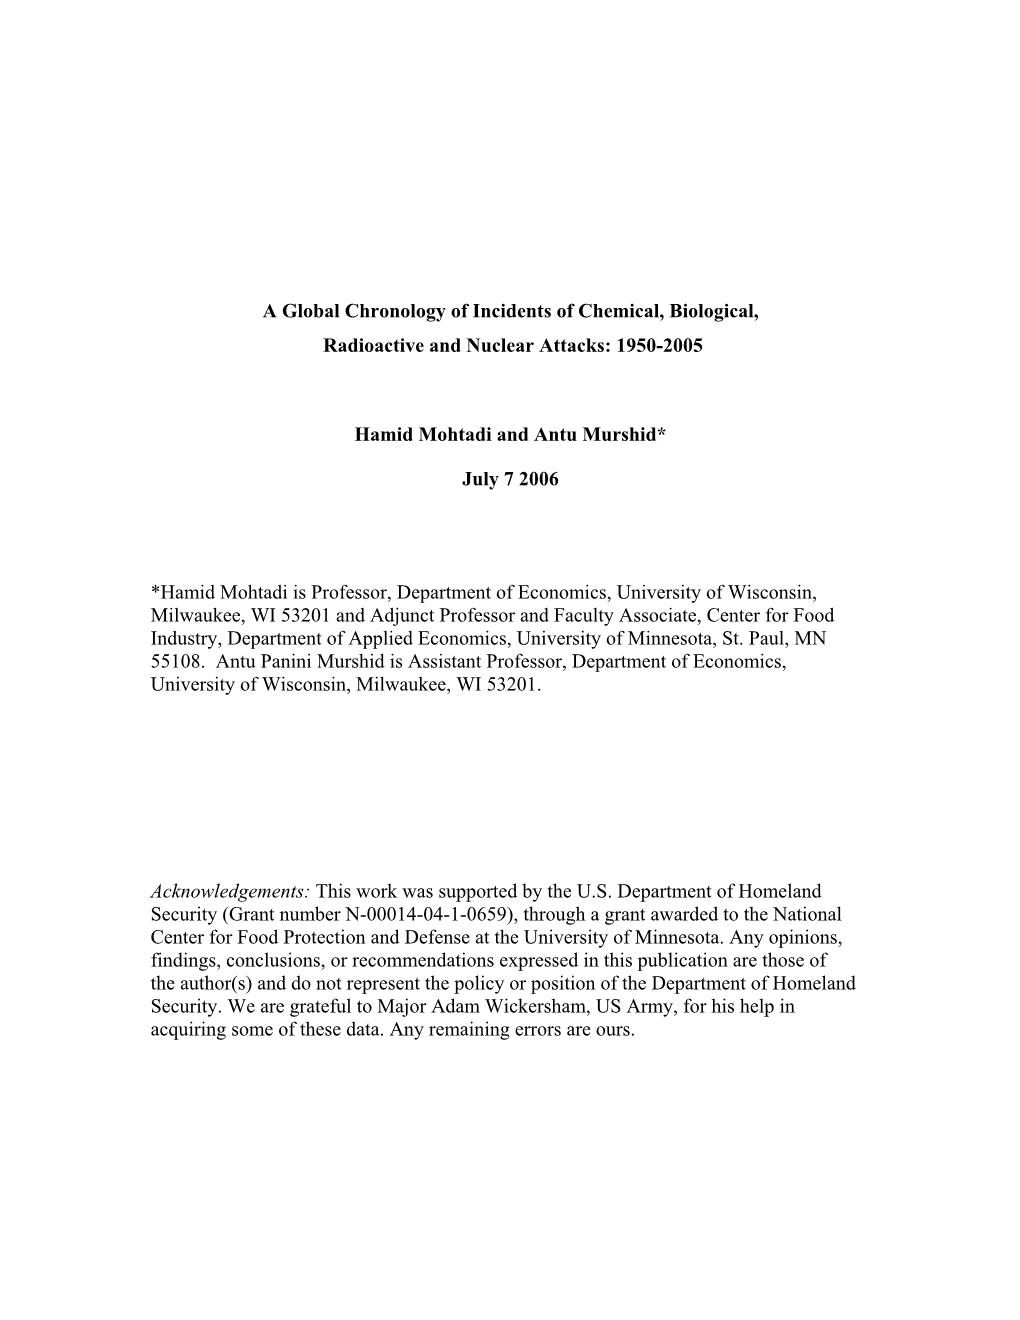 A Global Chronology of Incidents of Chemical, Biological, Radioactive and Nuclear Attacks: 1950-2005